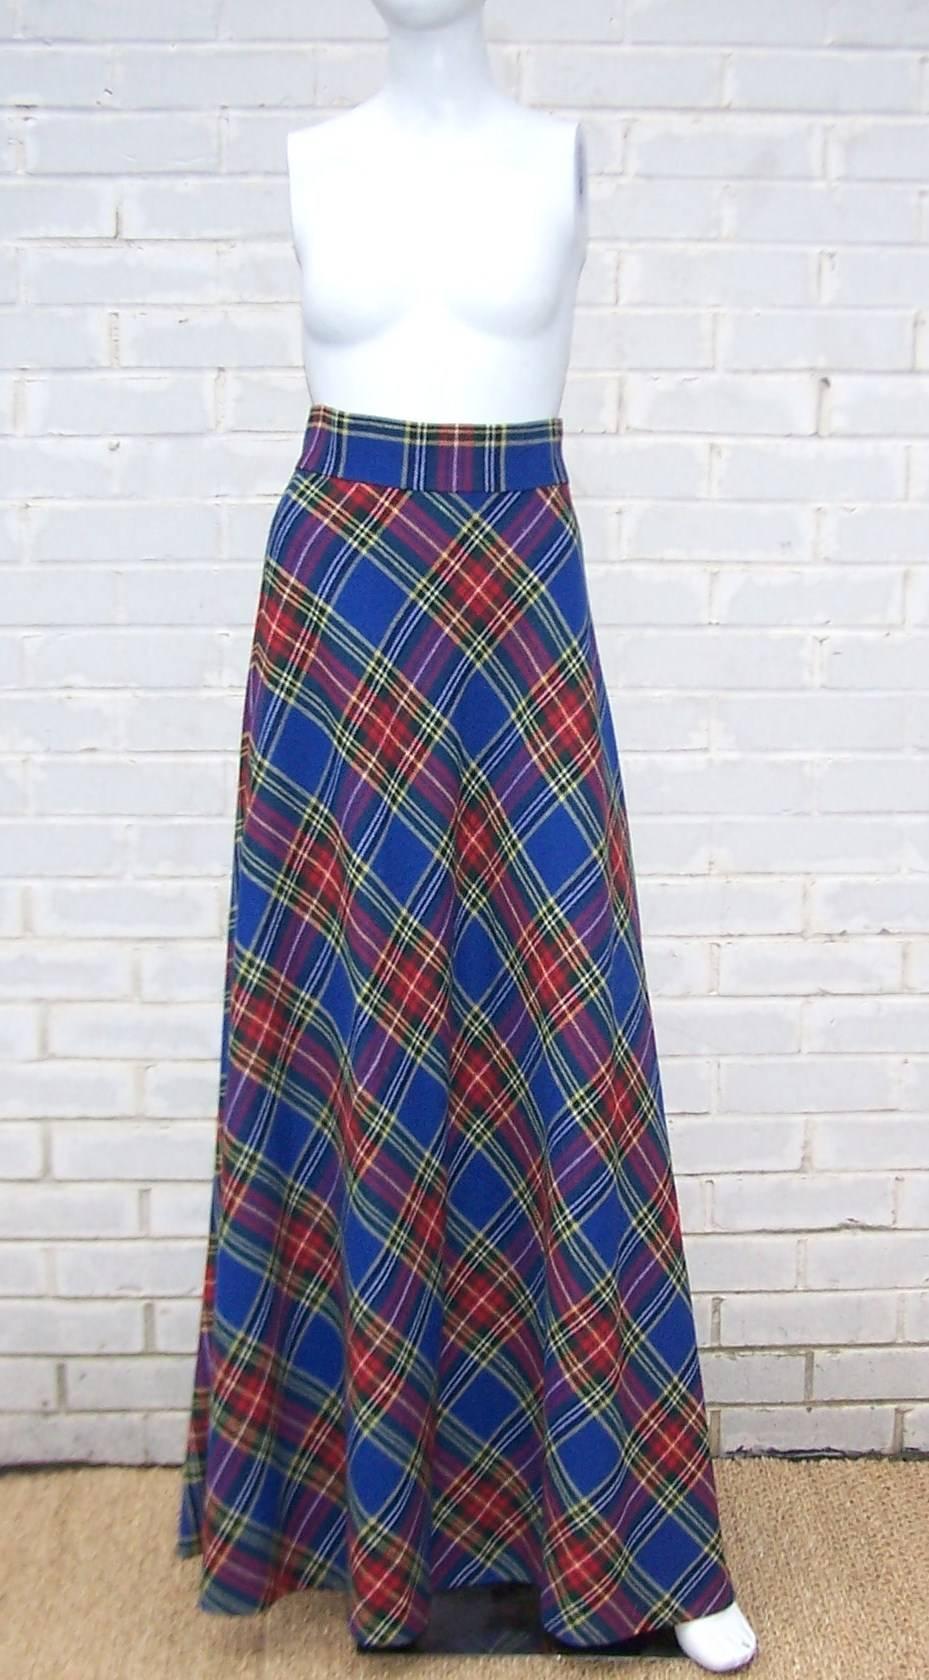 This maxi skirt is a long tall column of electric blue plaid goodness!  It is cut on the bias to accentuate your curves beautifully and create movement when you walk.  Red and yellow accents create additional vibrancy to the plaid.  The 2.5